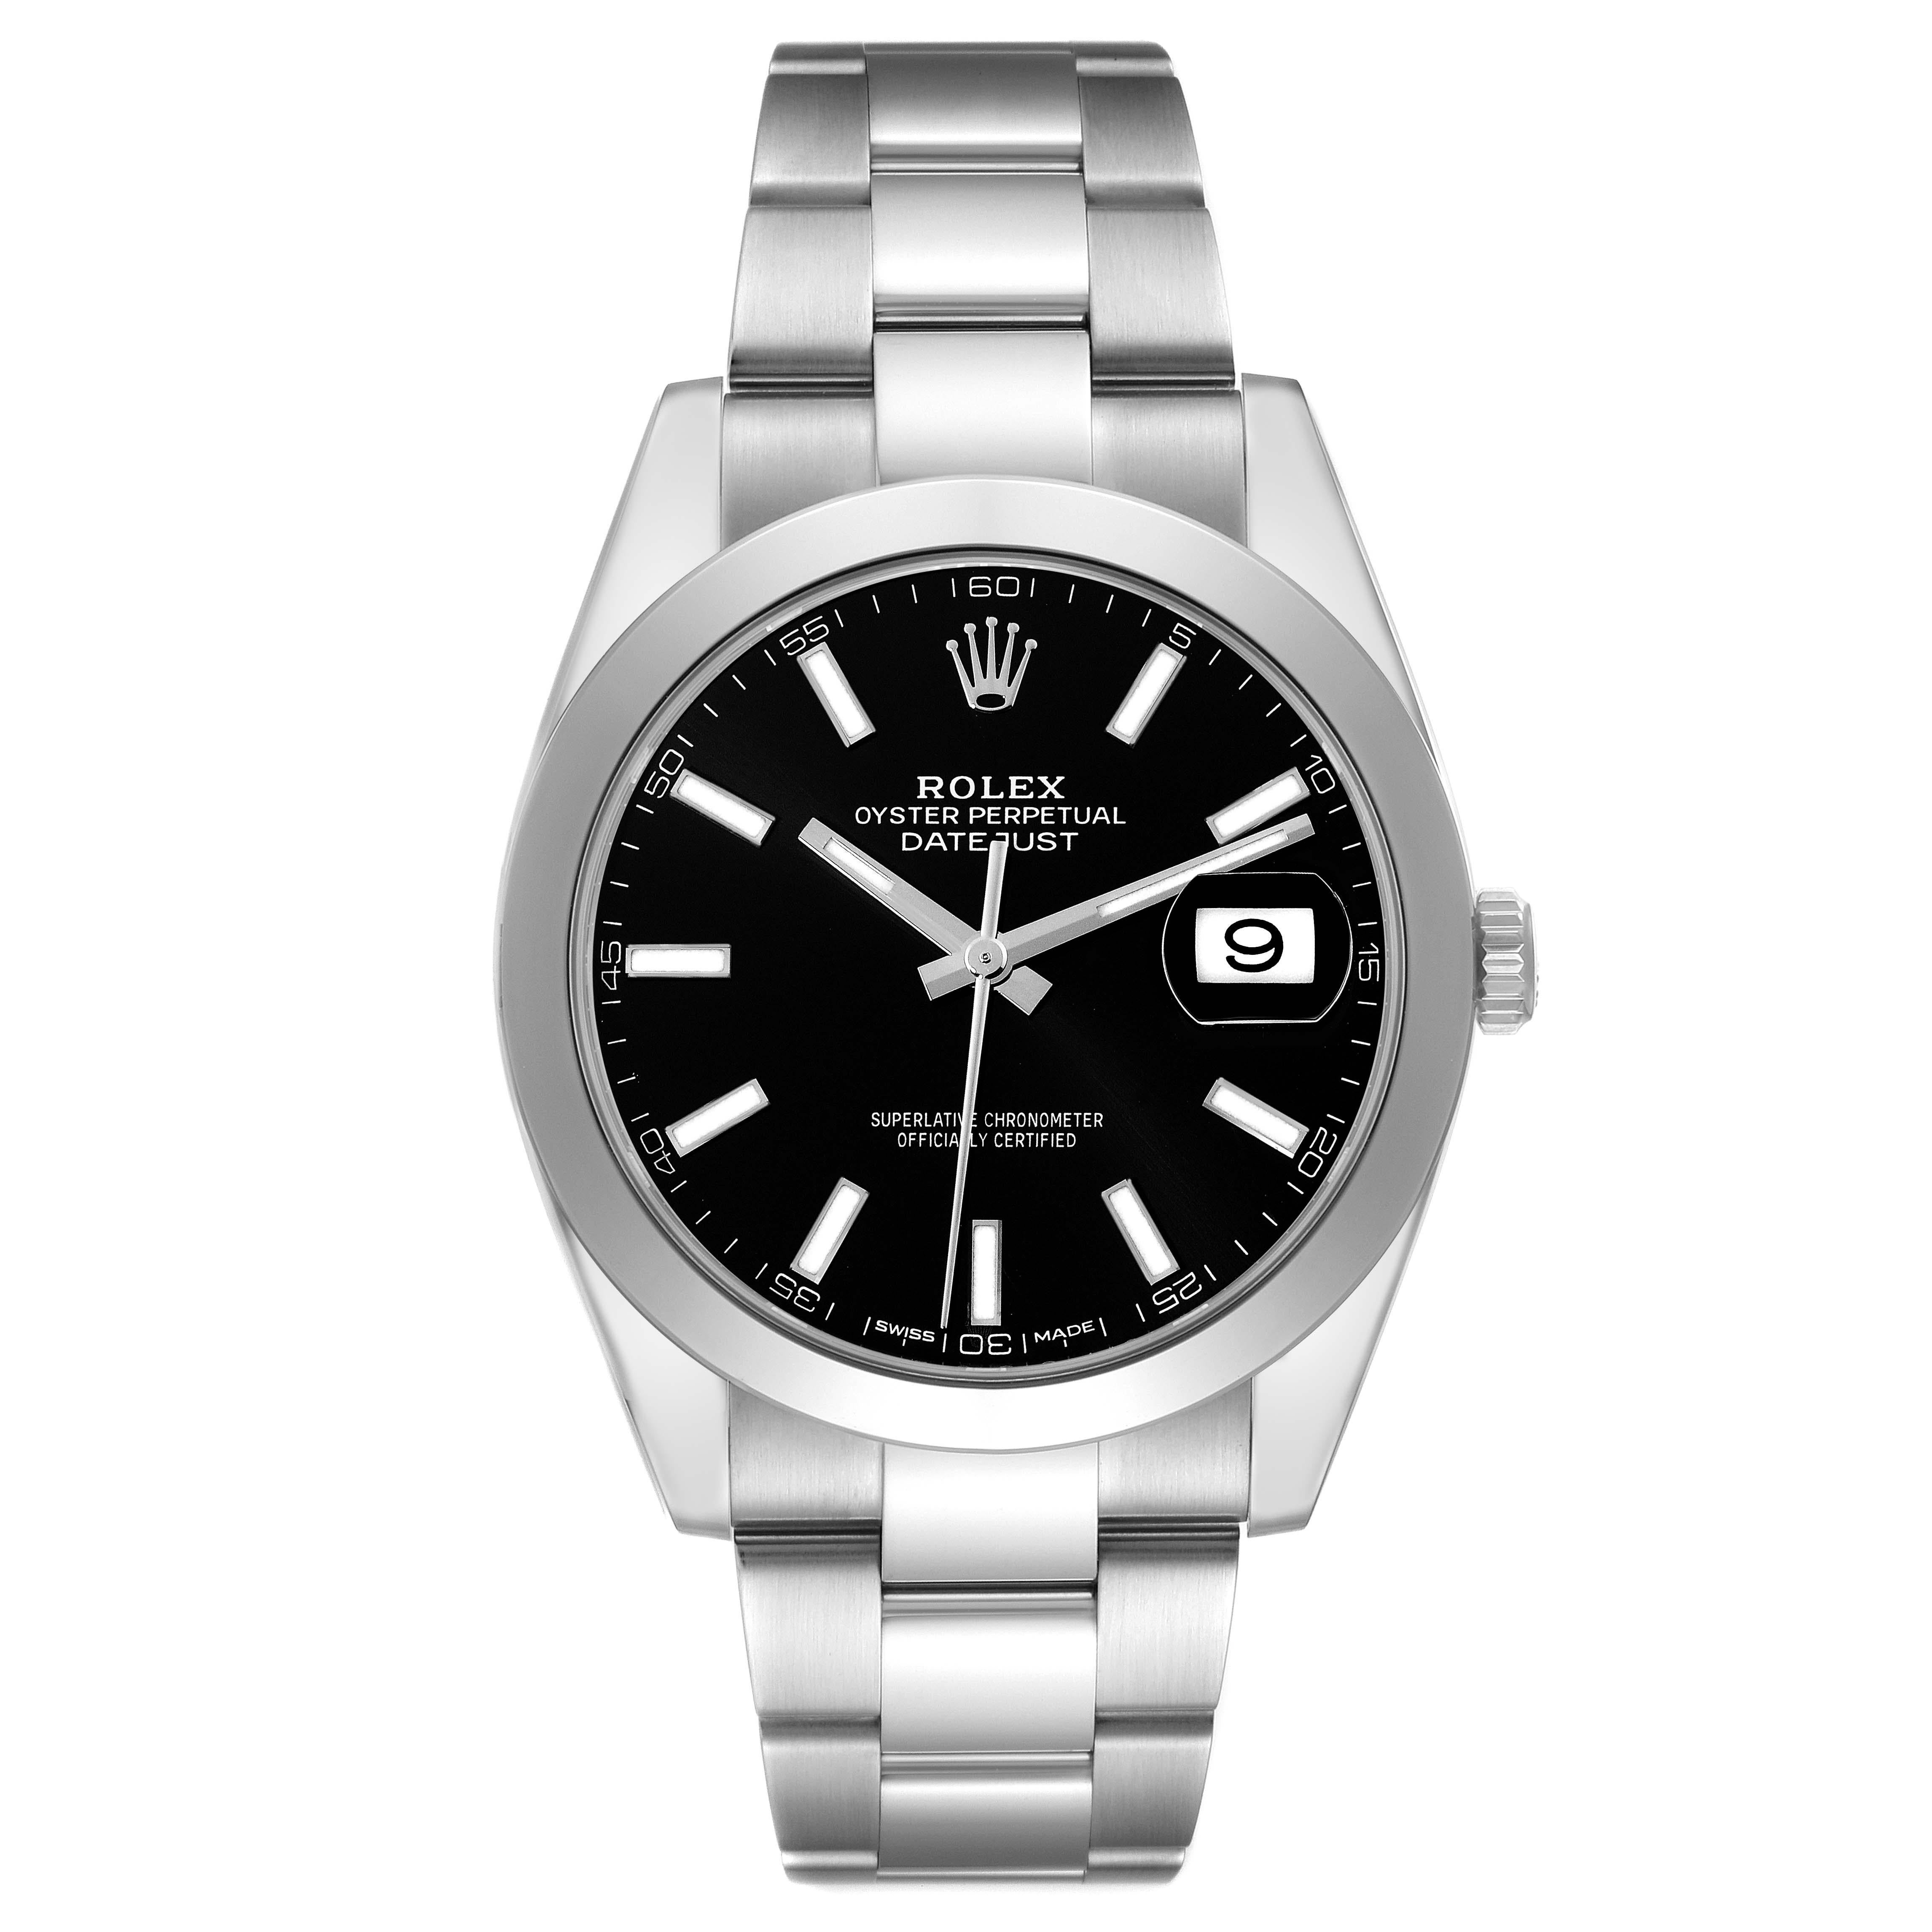 Rolex Datejust 41 Black Dial Steel Oyster Bracelet Mens Watch 126300 Box Card. Officially certified chronometer automatic self-winding movement with quickset date. Stainless steel case 41 mm in diameter. Rolex logo on a crown. Stainless steel smooth